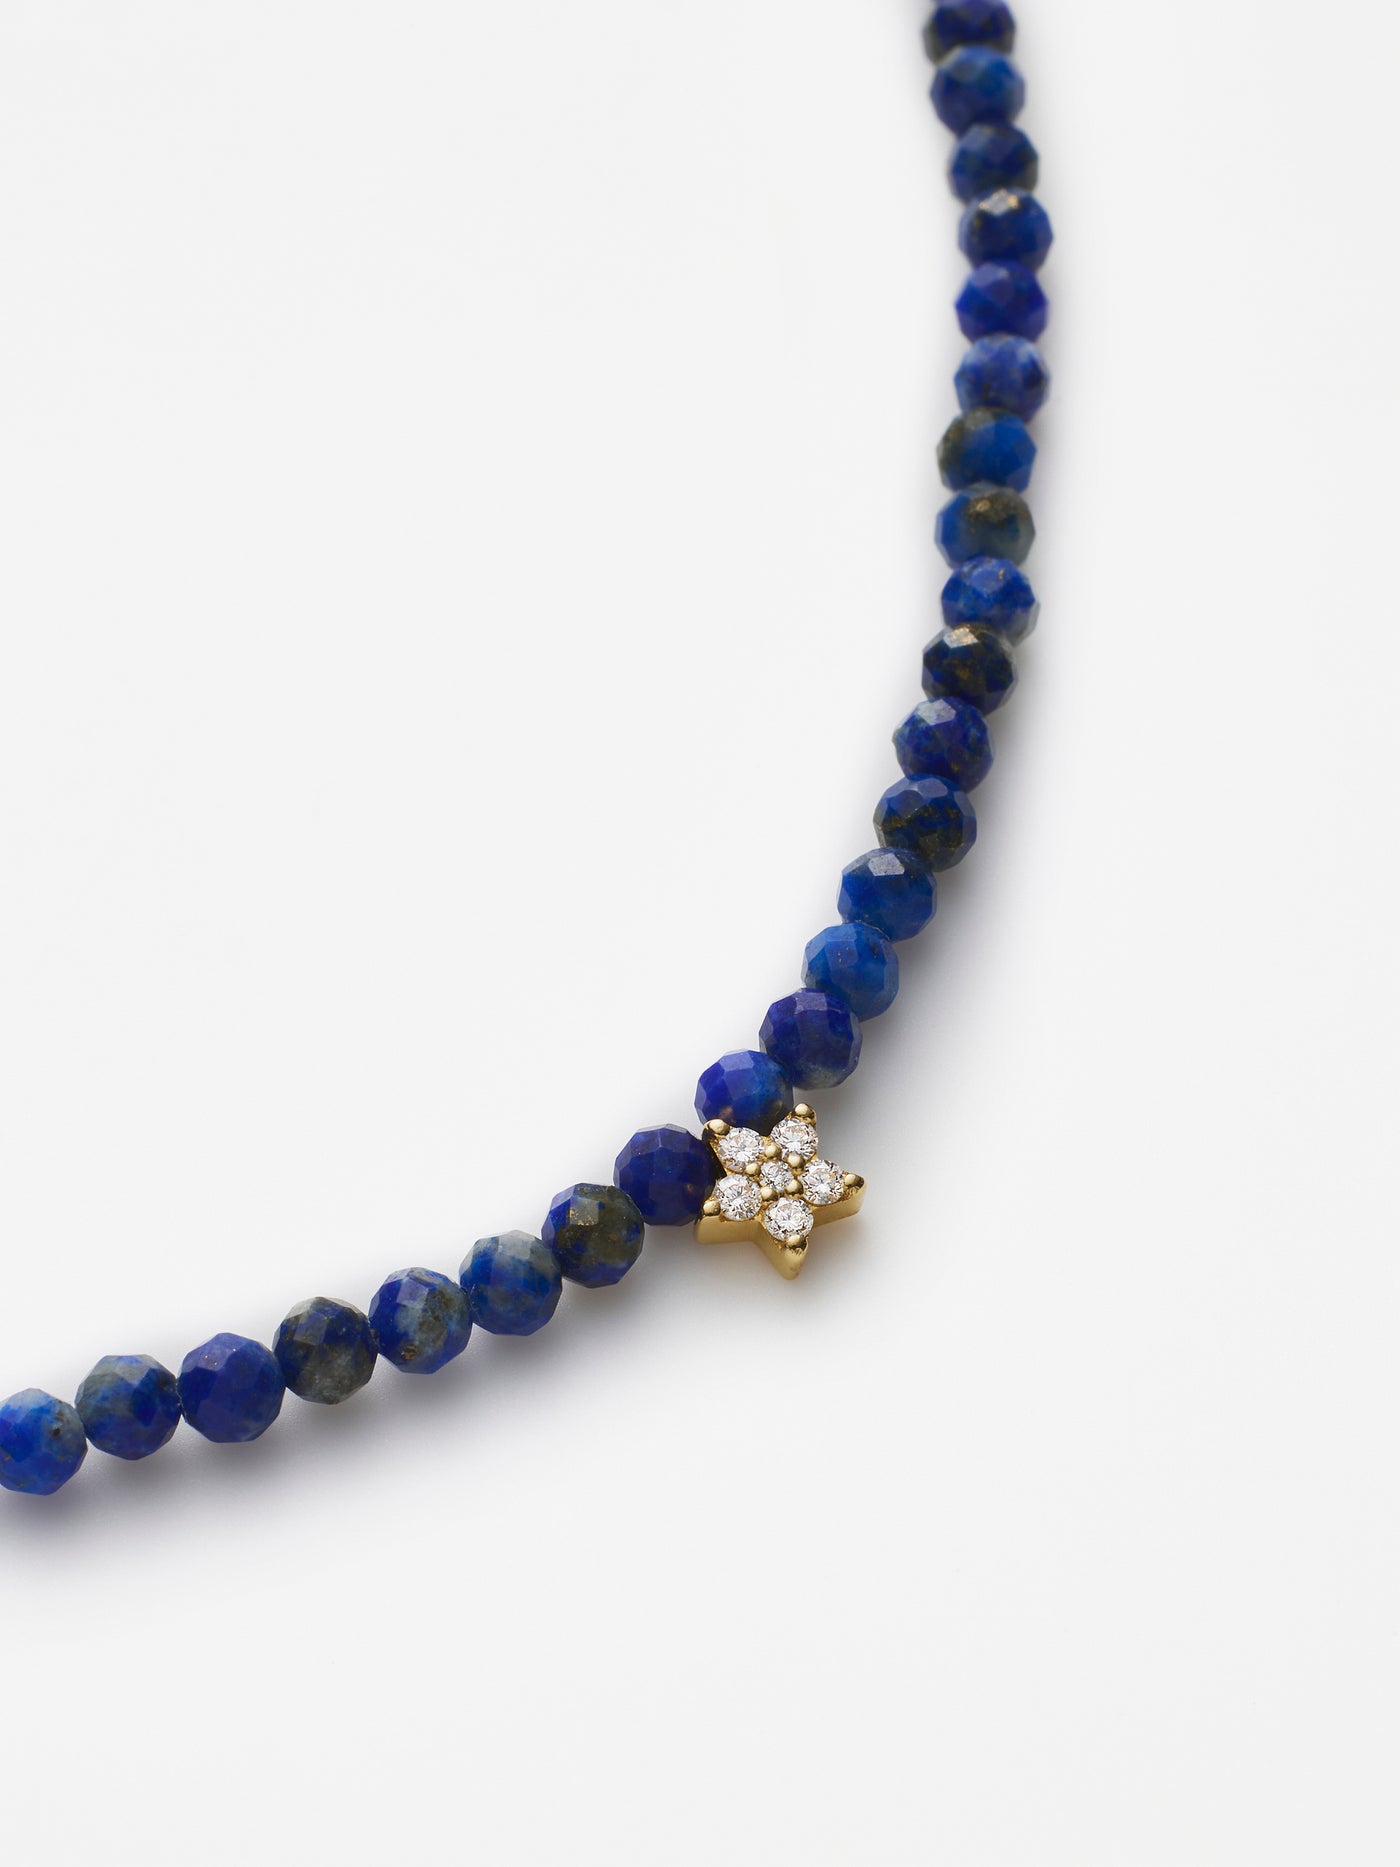 Hand-strung bracelet with natural lapis lazuli gemstones and miniature three-dimensional diamond star in 18k solid gold